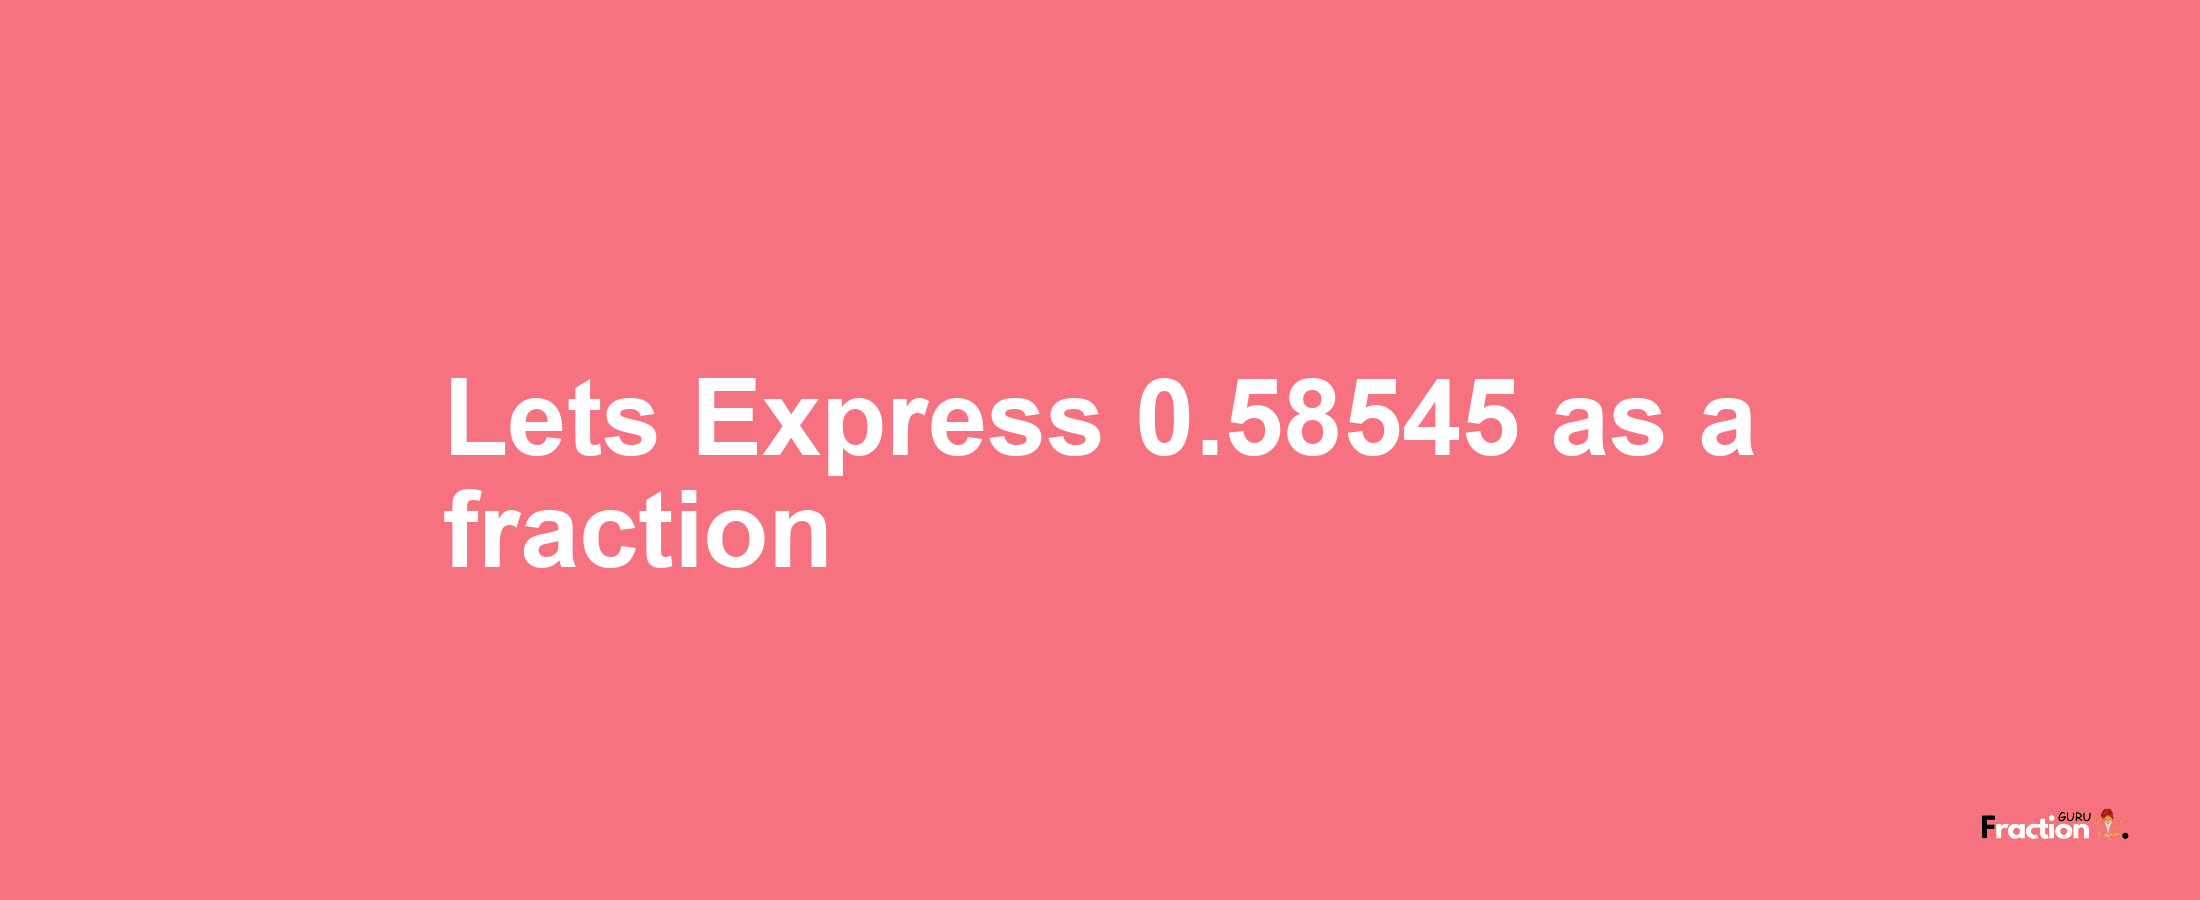 Lets Express 0.58545 as afraction